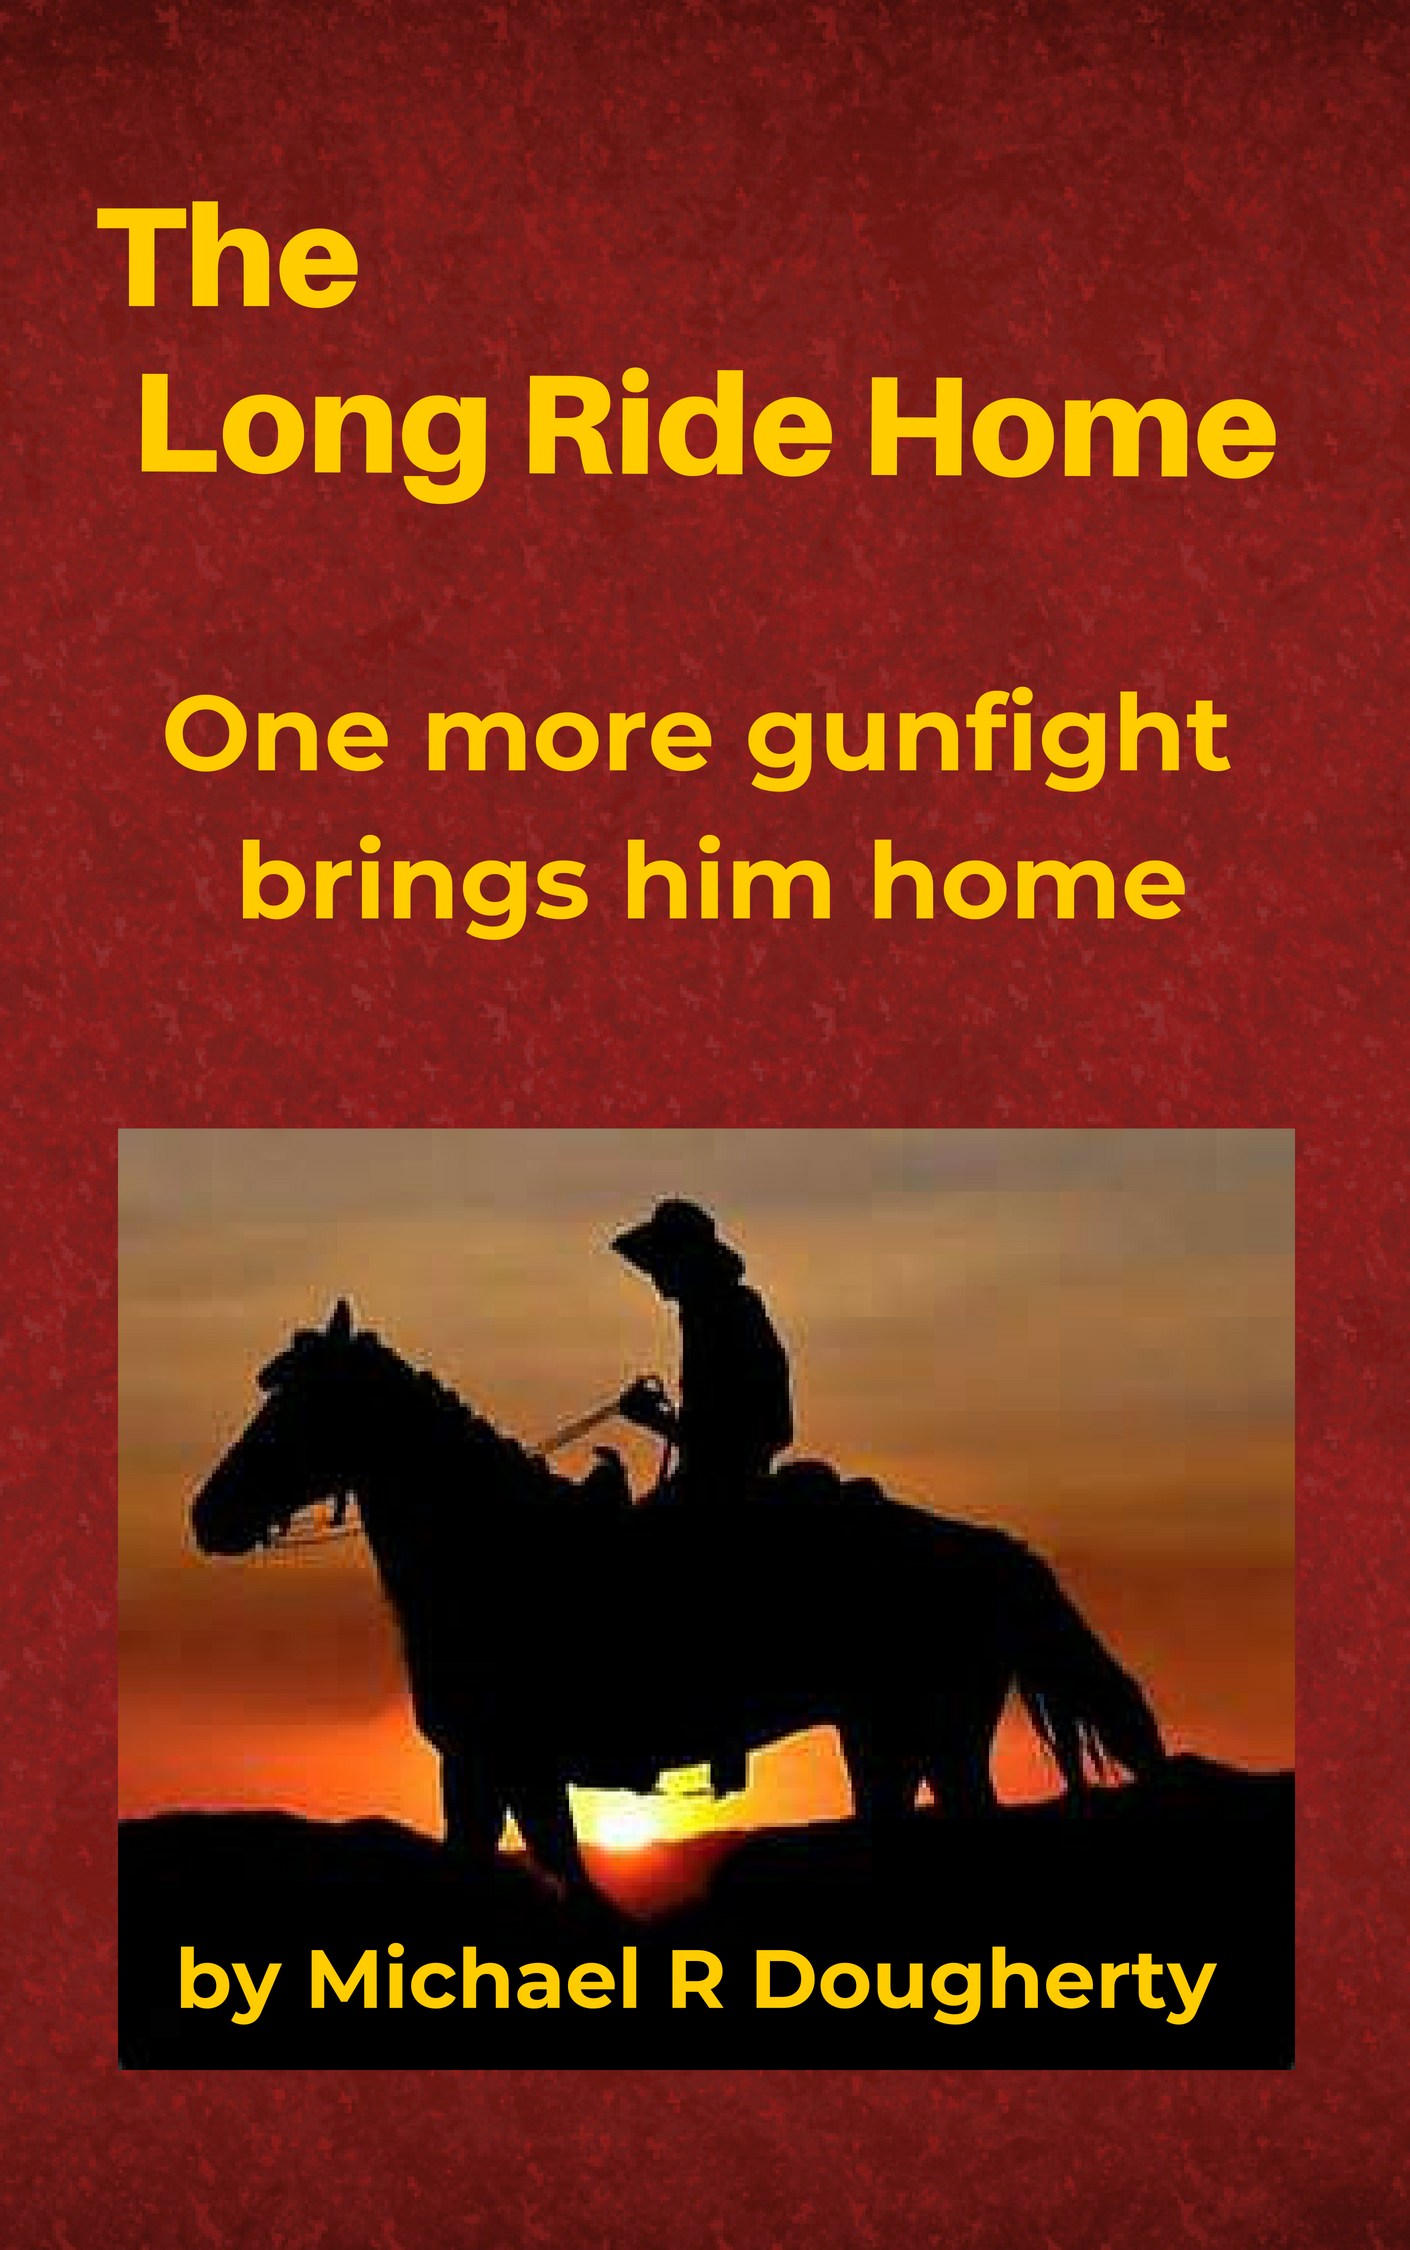 FREE: The Long Ride Home by Michael R Dougherty